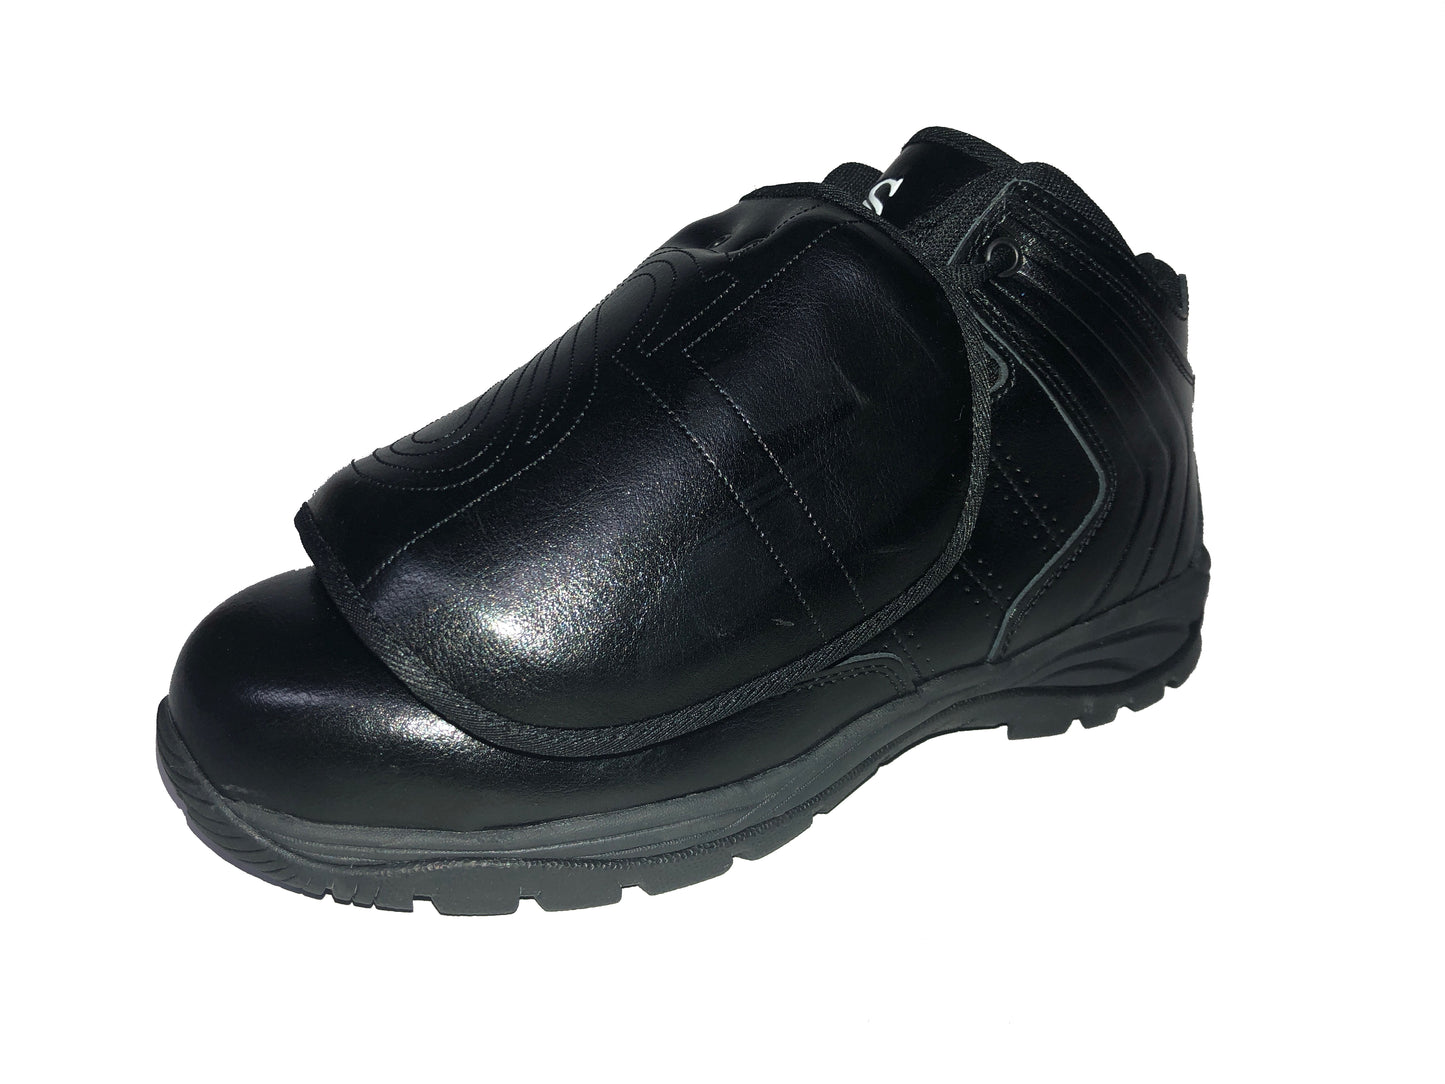 BBS-PS1 - Smitty All Black Mid-Cut Umpire Plate Shoe